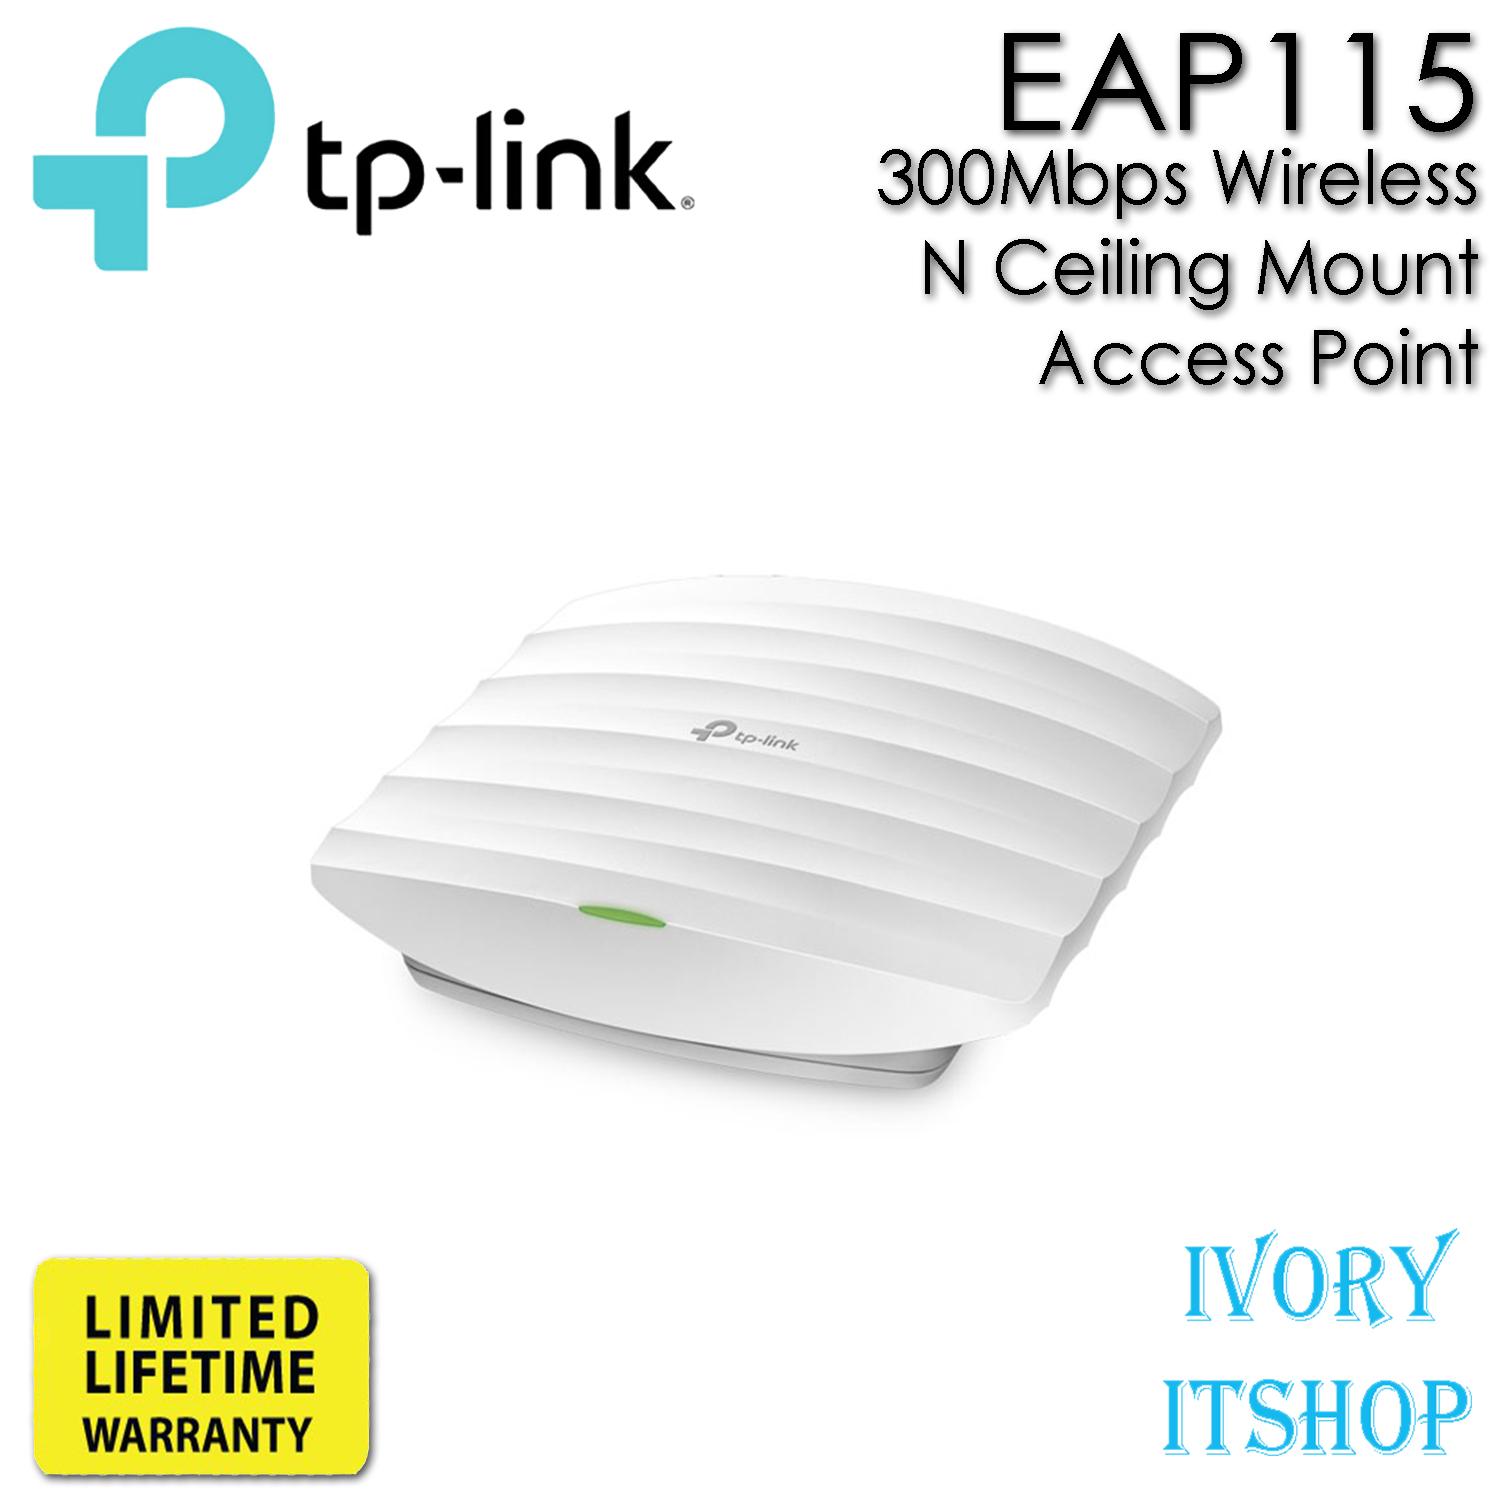 TP-Link EAP115 Access Point สำหรับองค์กร (300Mbps Wireless N Ceiling Mount Access Point)/ivoryitshop